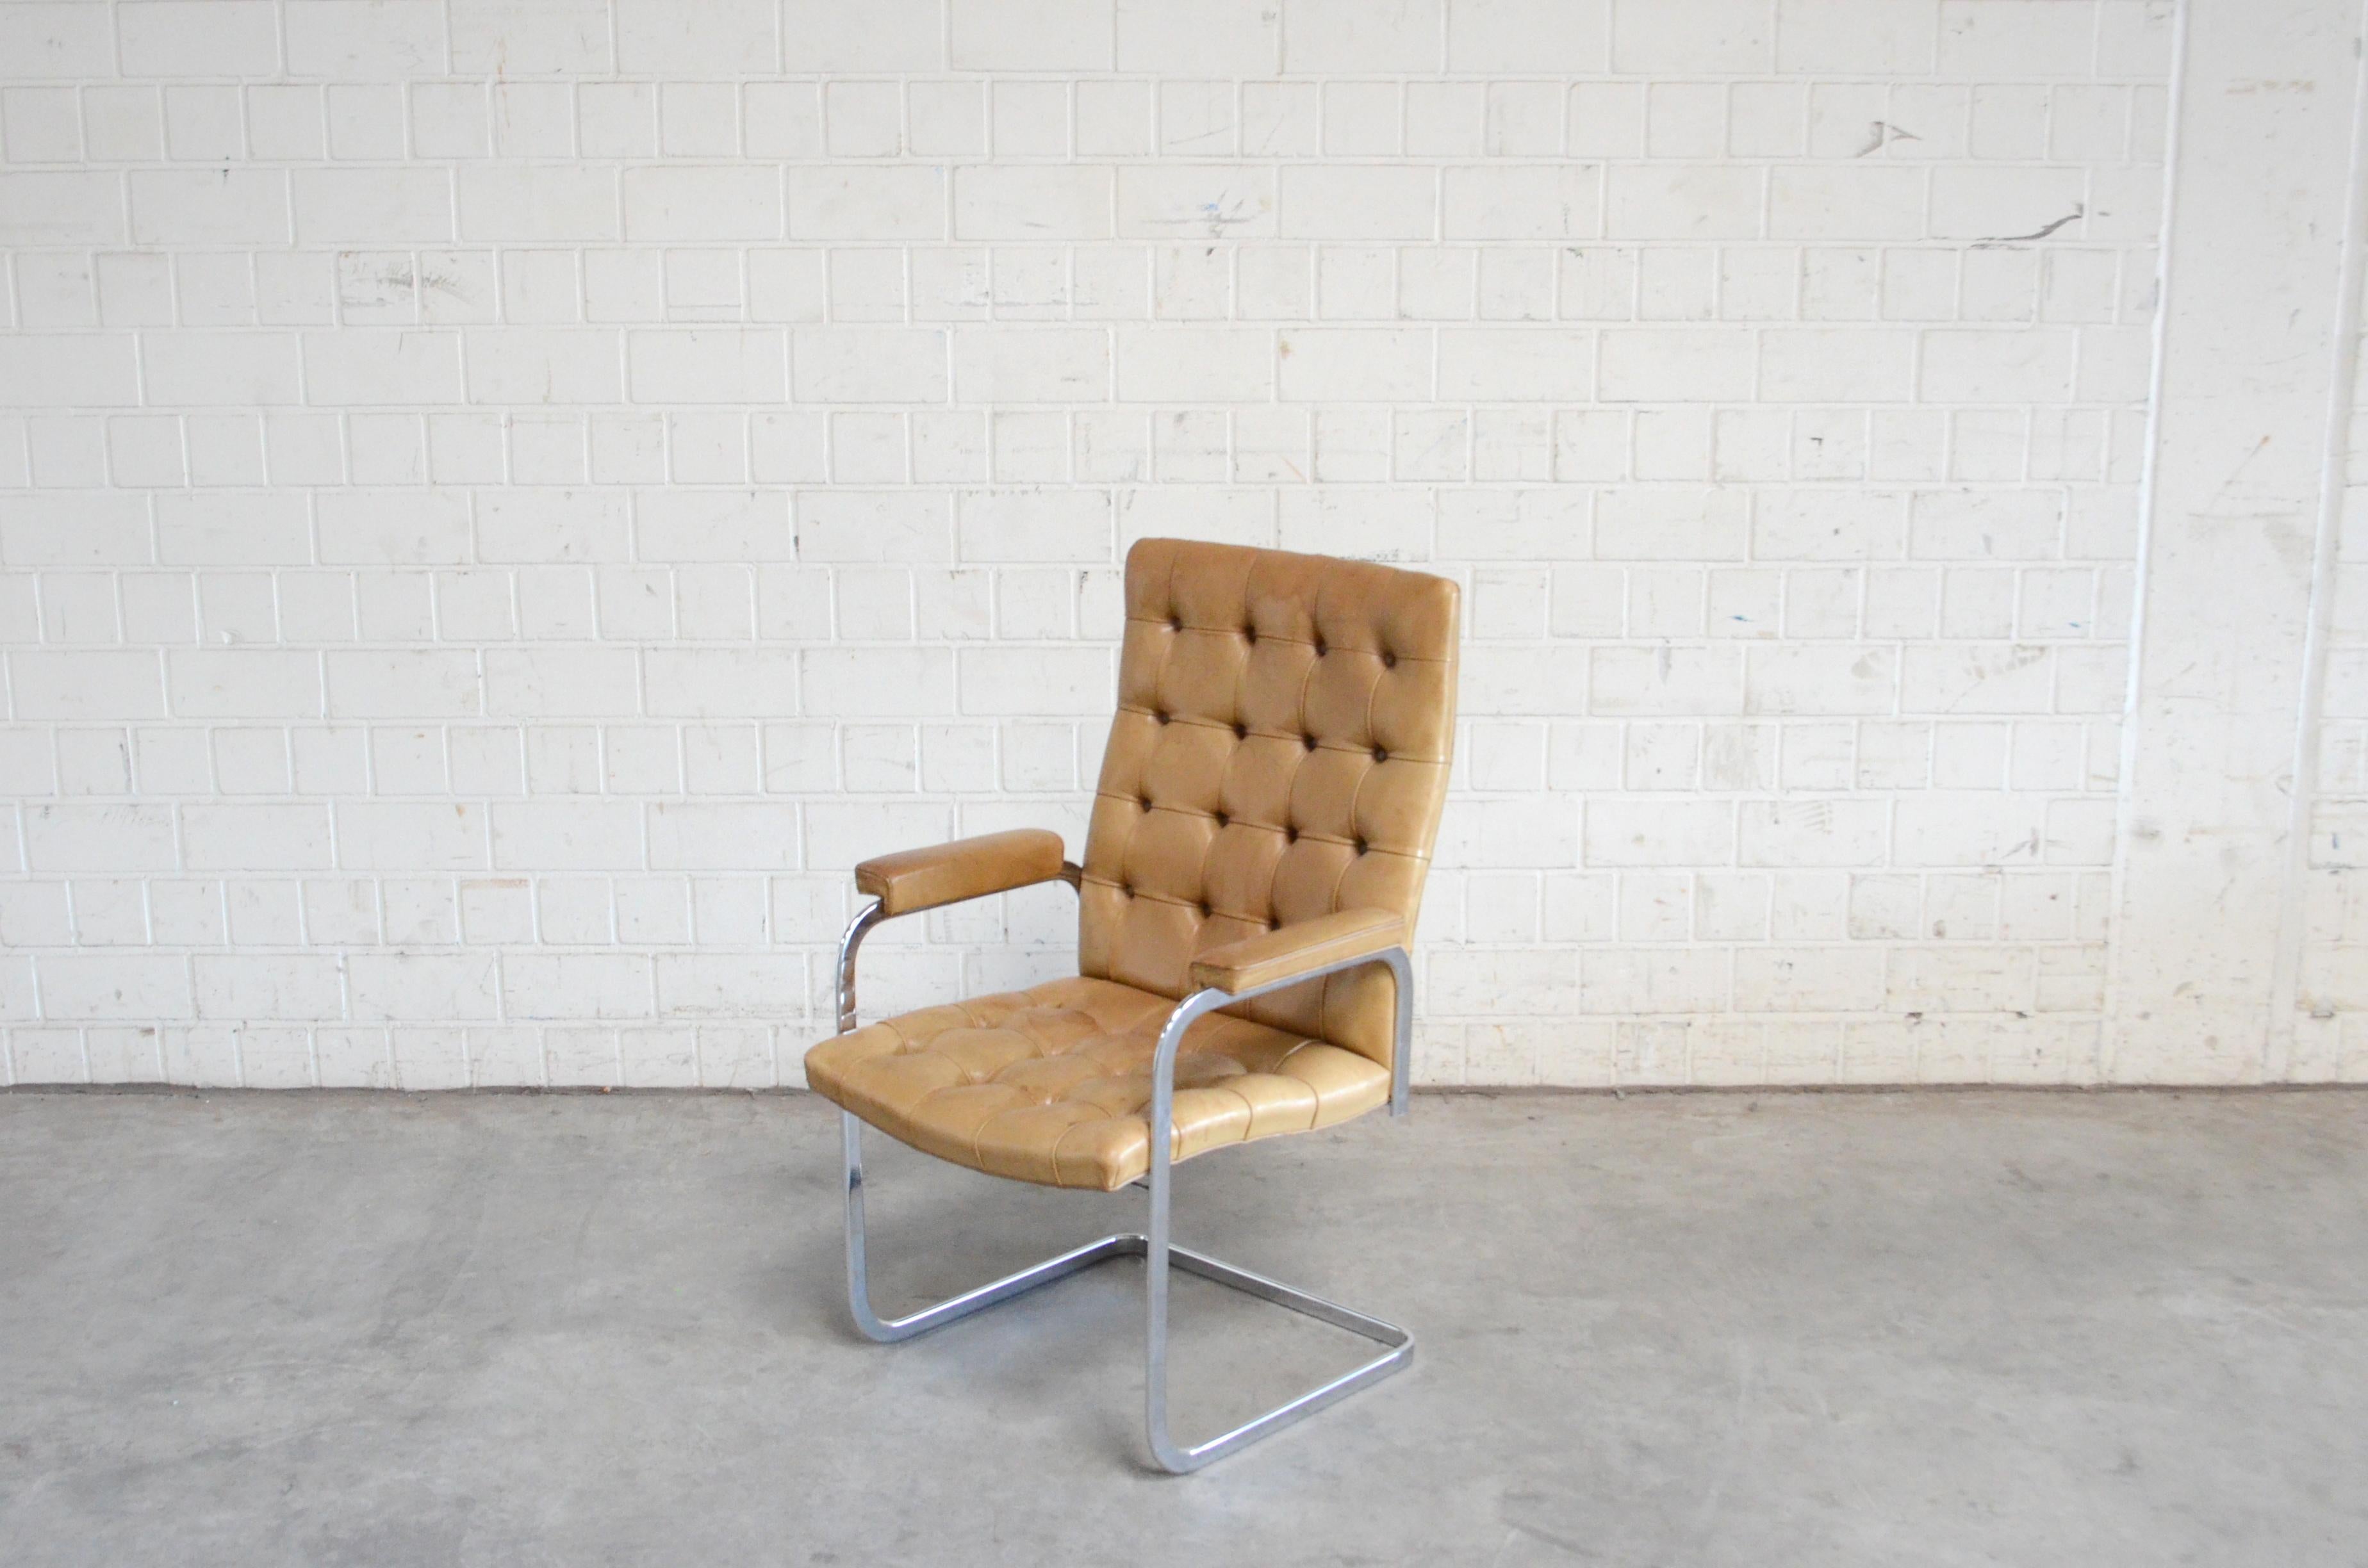 Robert Haussmann RH 305 armchair design of 1957 and manufactured by De Sede.
Cognac aniline leather an a chrome steel frame.
This is a Classic Swiss design chair in the tufted high back version.
With some patina on the leather.
Price for 1